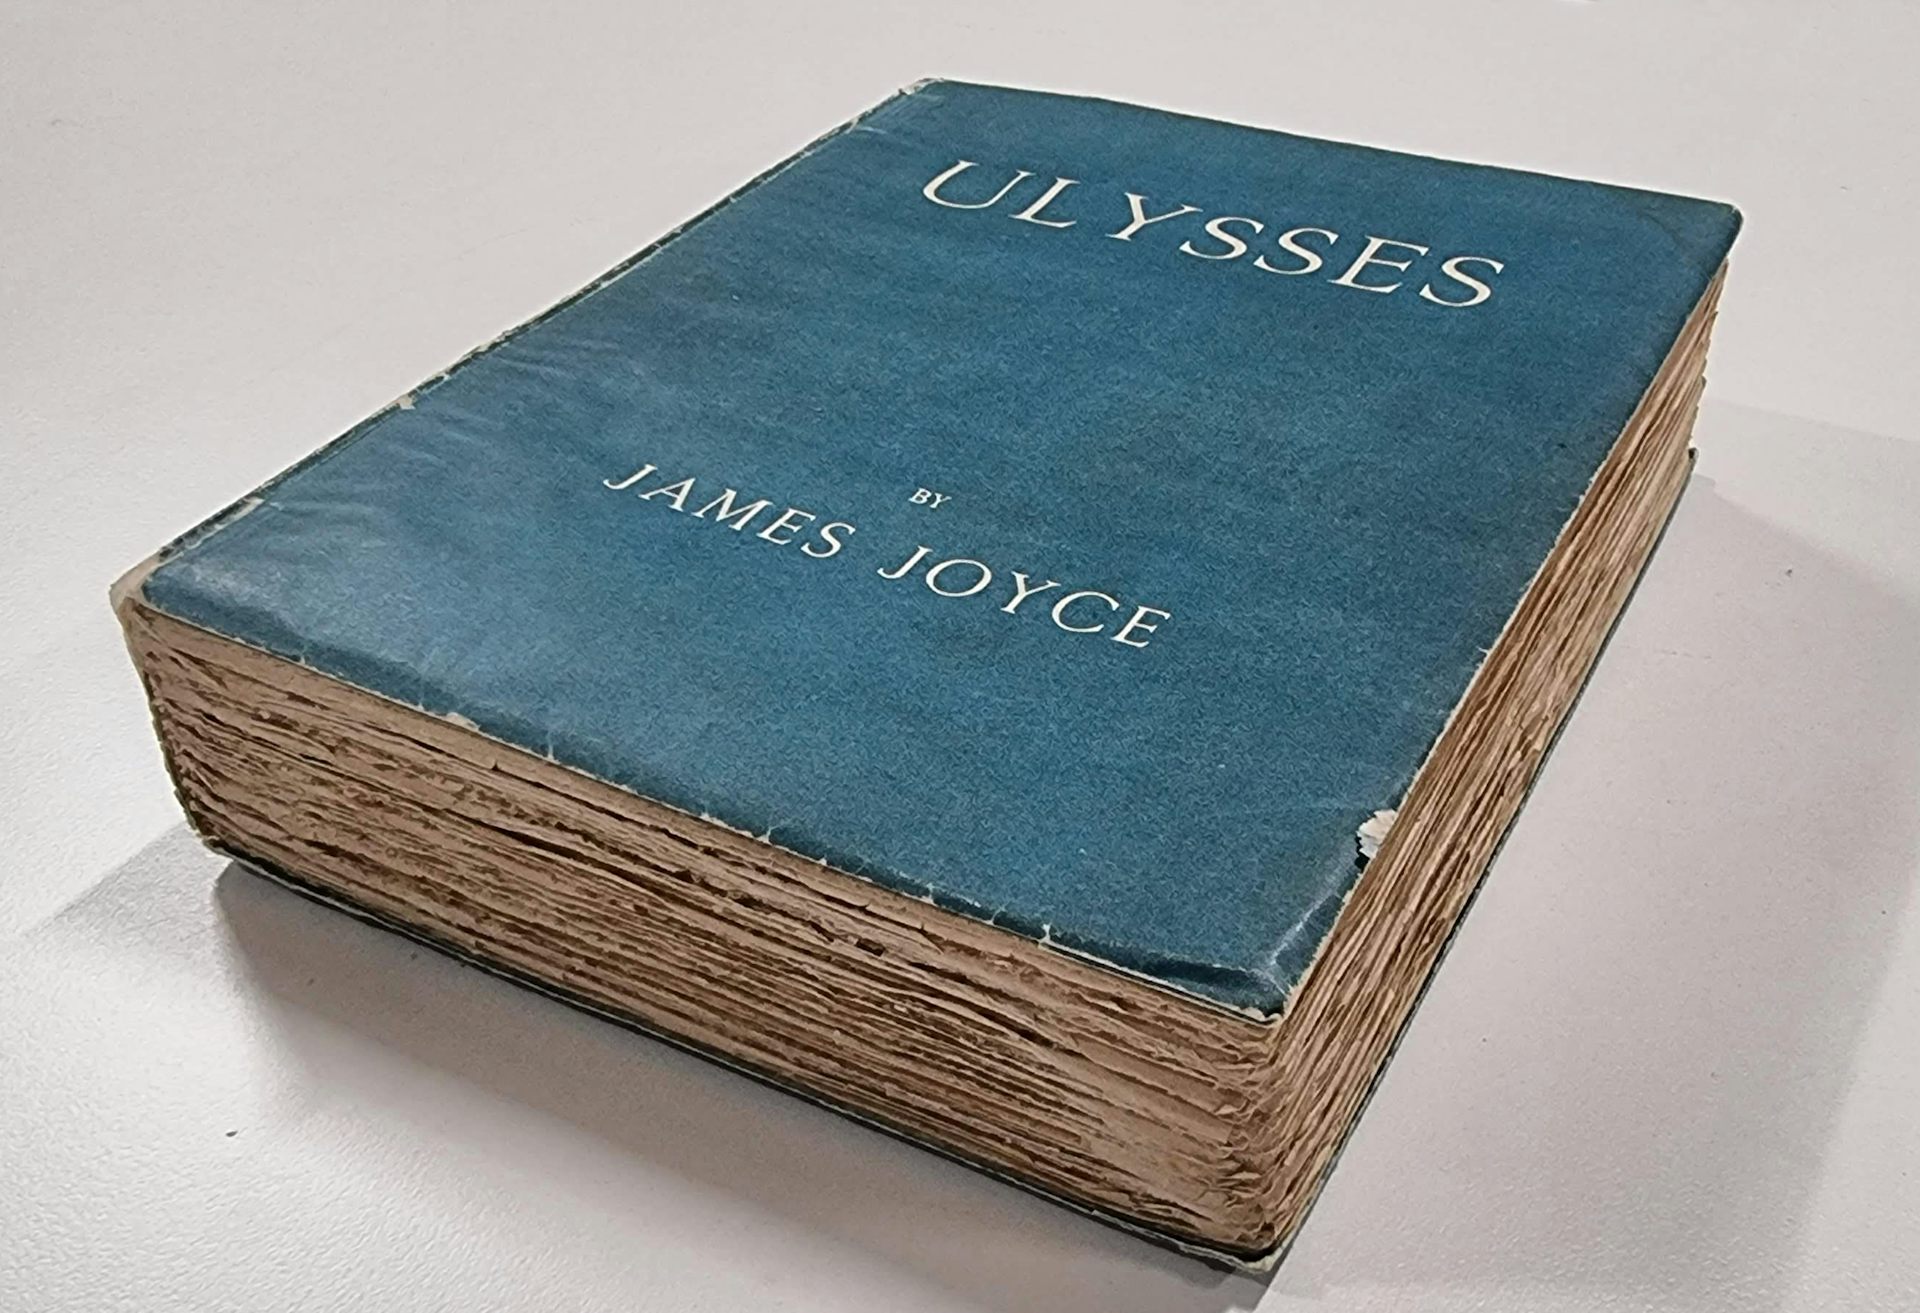 Ulysses at 100: why Joyce was so obsessed with the perfect blue cover